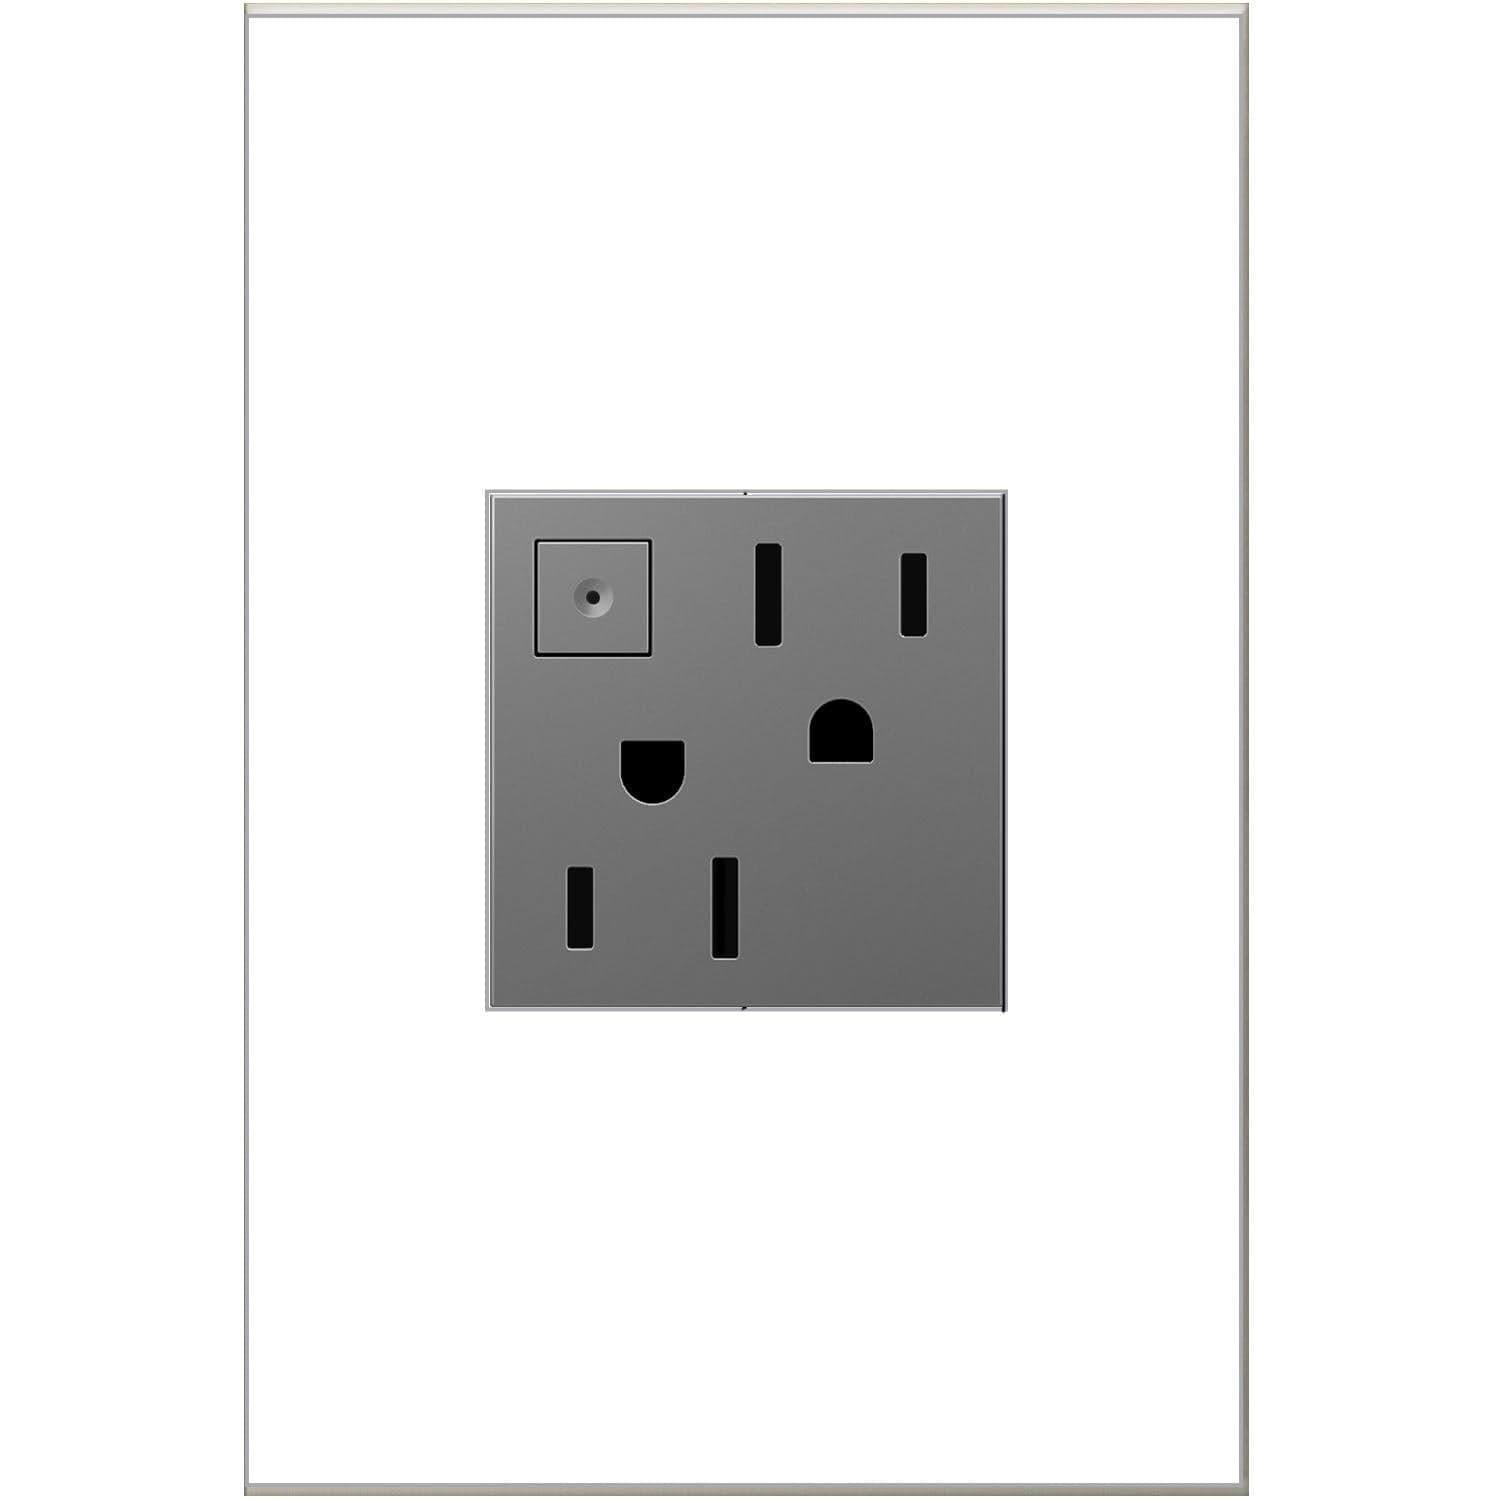 Legrand - adorne® 15A Energy-Saving On/Off Outlet - ARPS152M4 | Montreal Lighting & Hardware